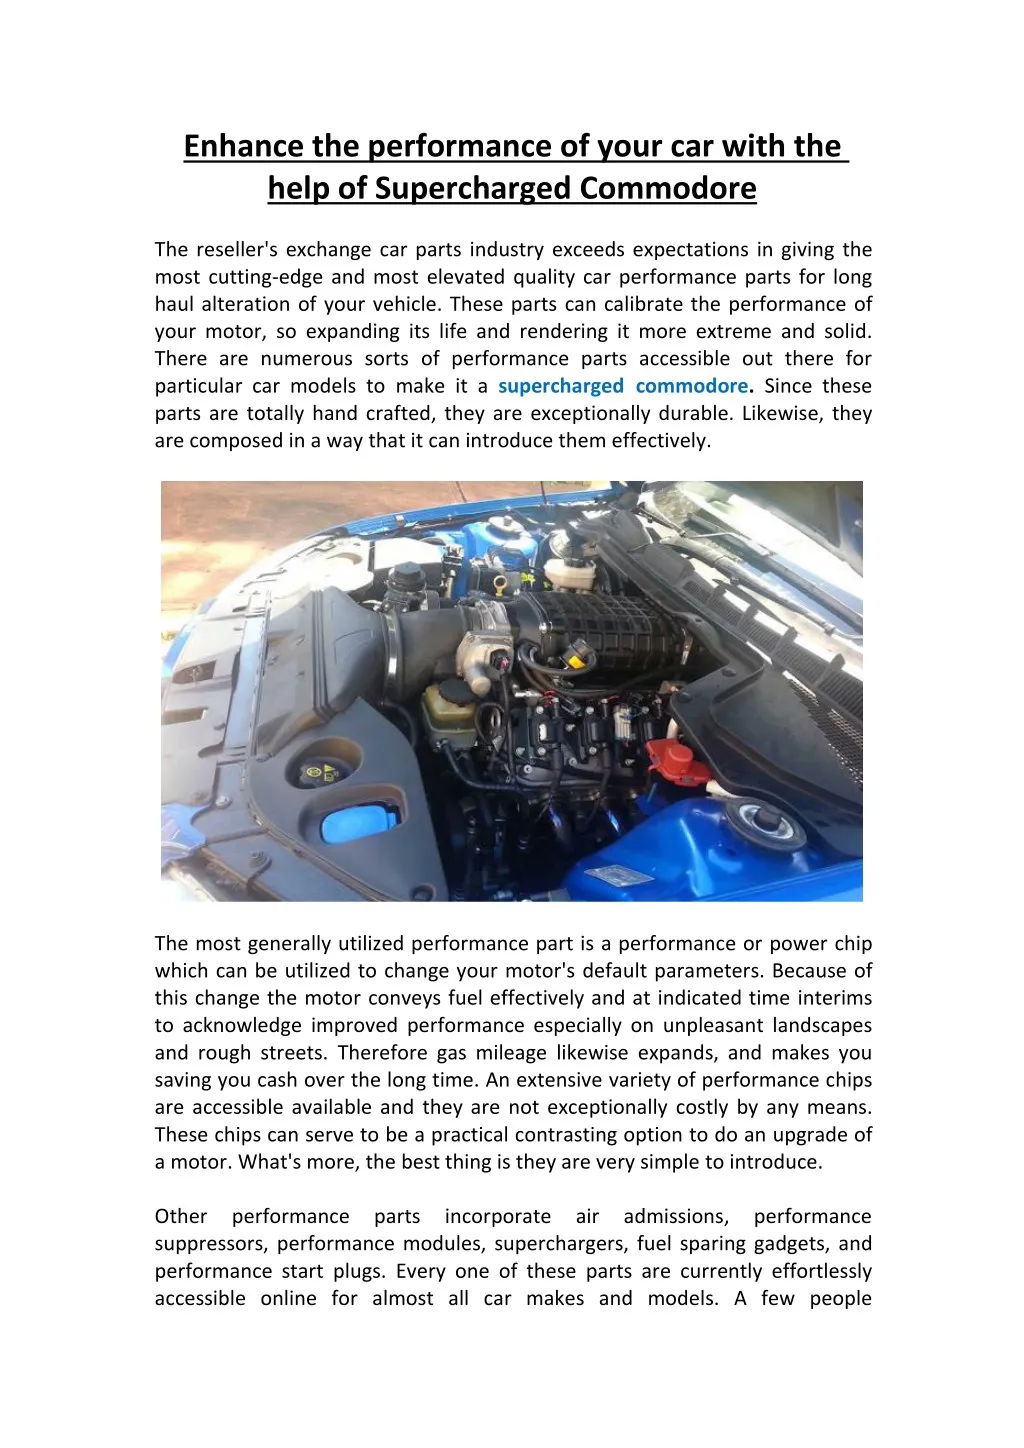 enhance the performance of your car with the help